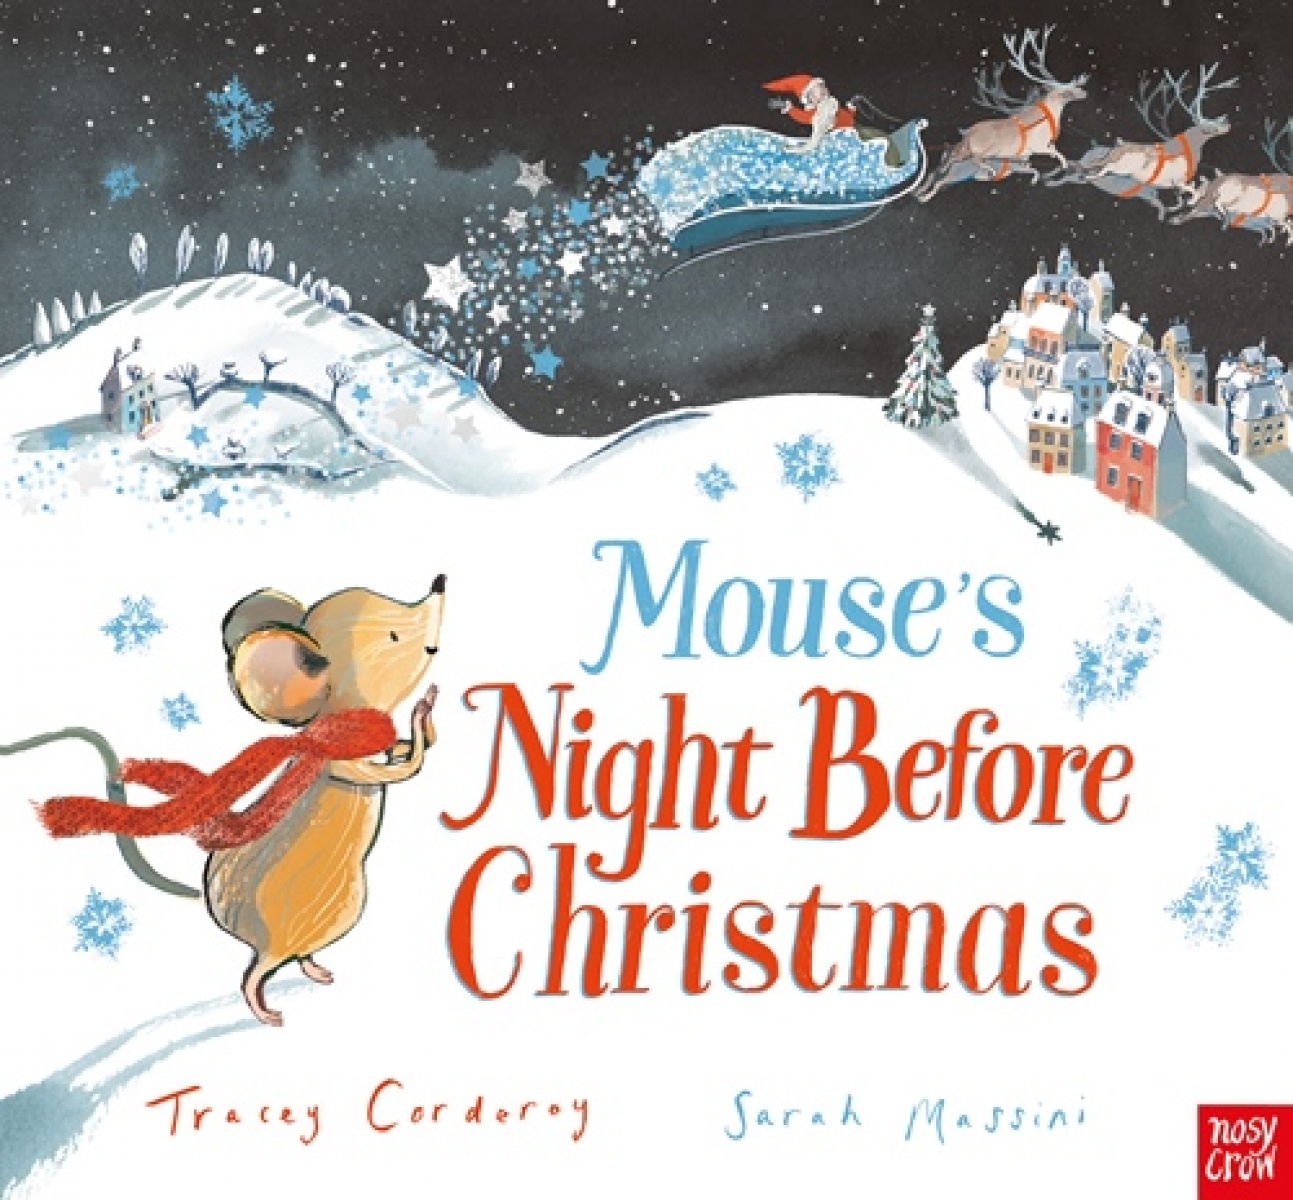 Corderoy Tracey Mouse's Night Before Christmas 